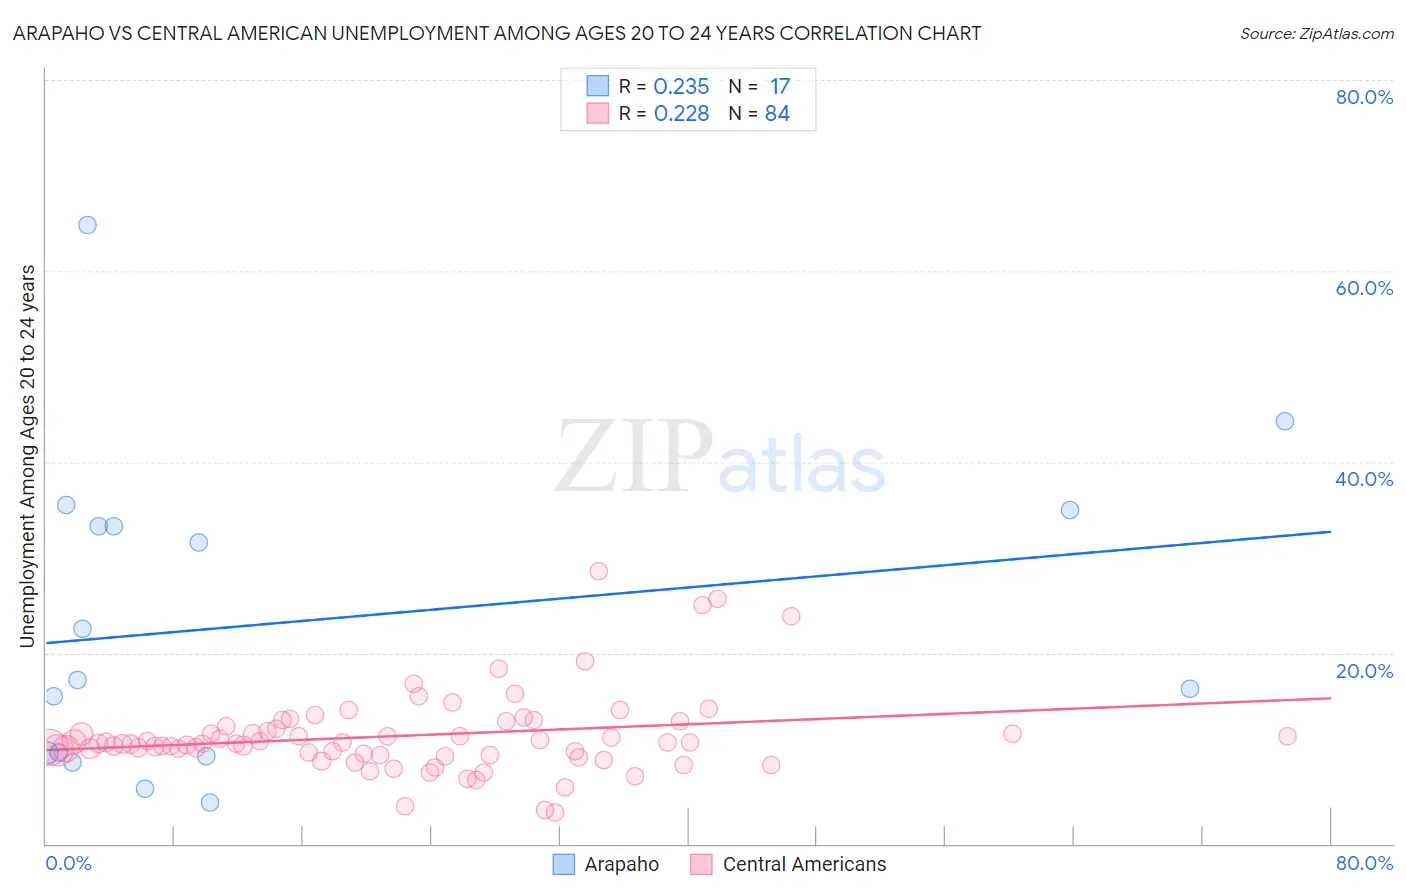 Arapaho vs Central American Unemployment Among Ages 20 to 24 years